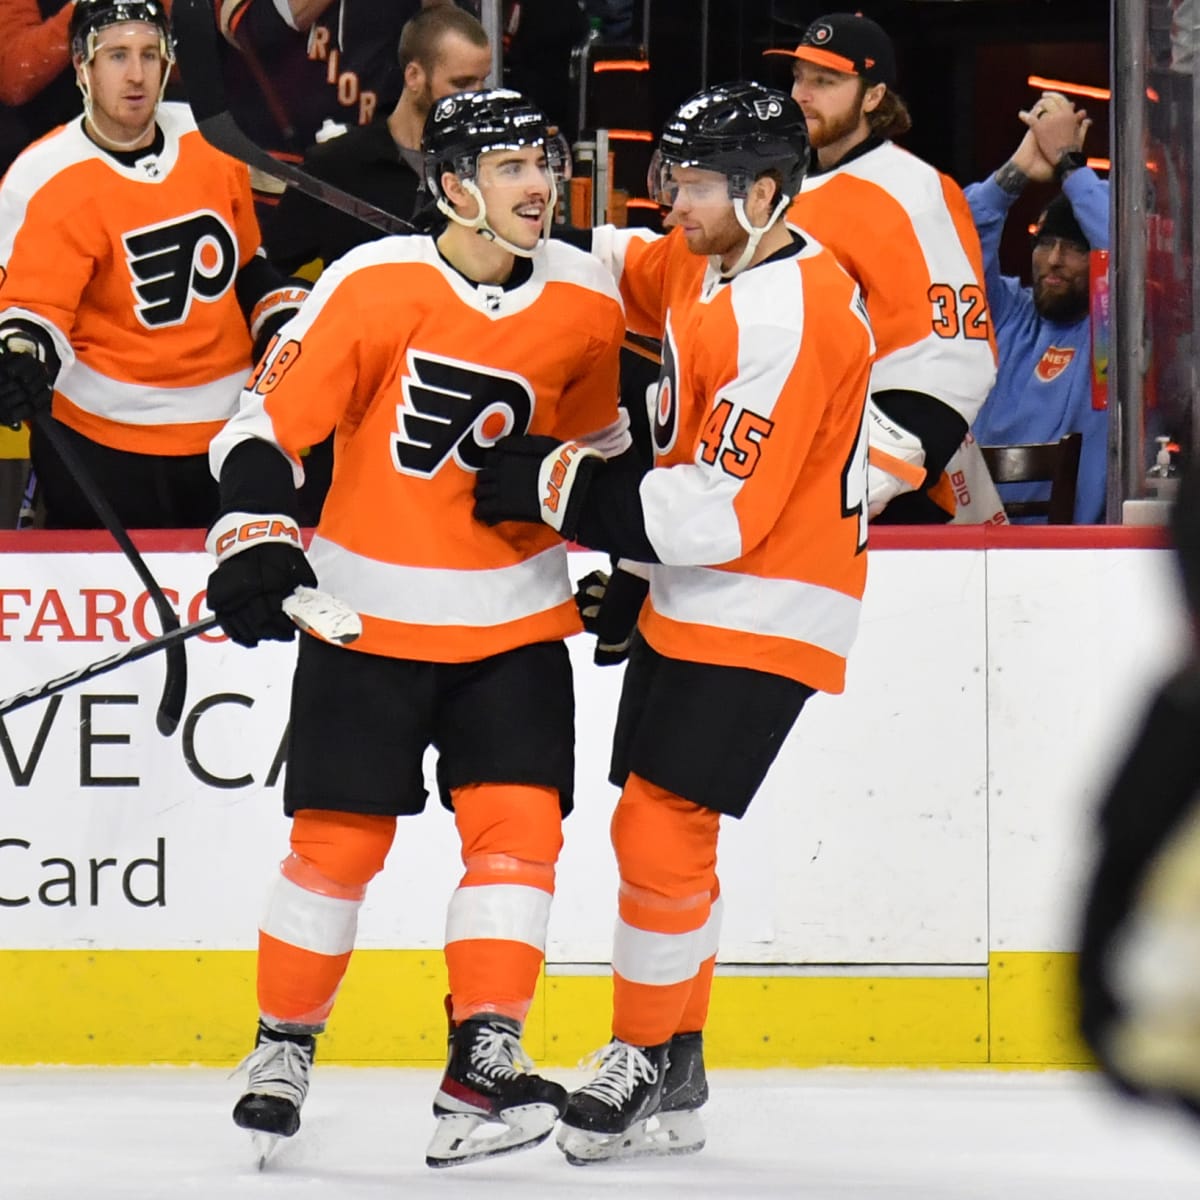 Flyers Bridge Deals for Cates, York are Current Cap Reality for NHL